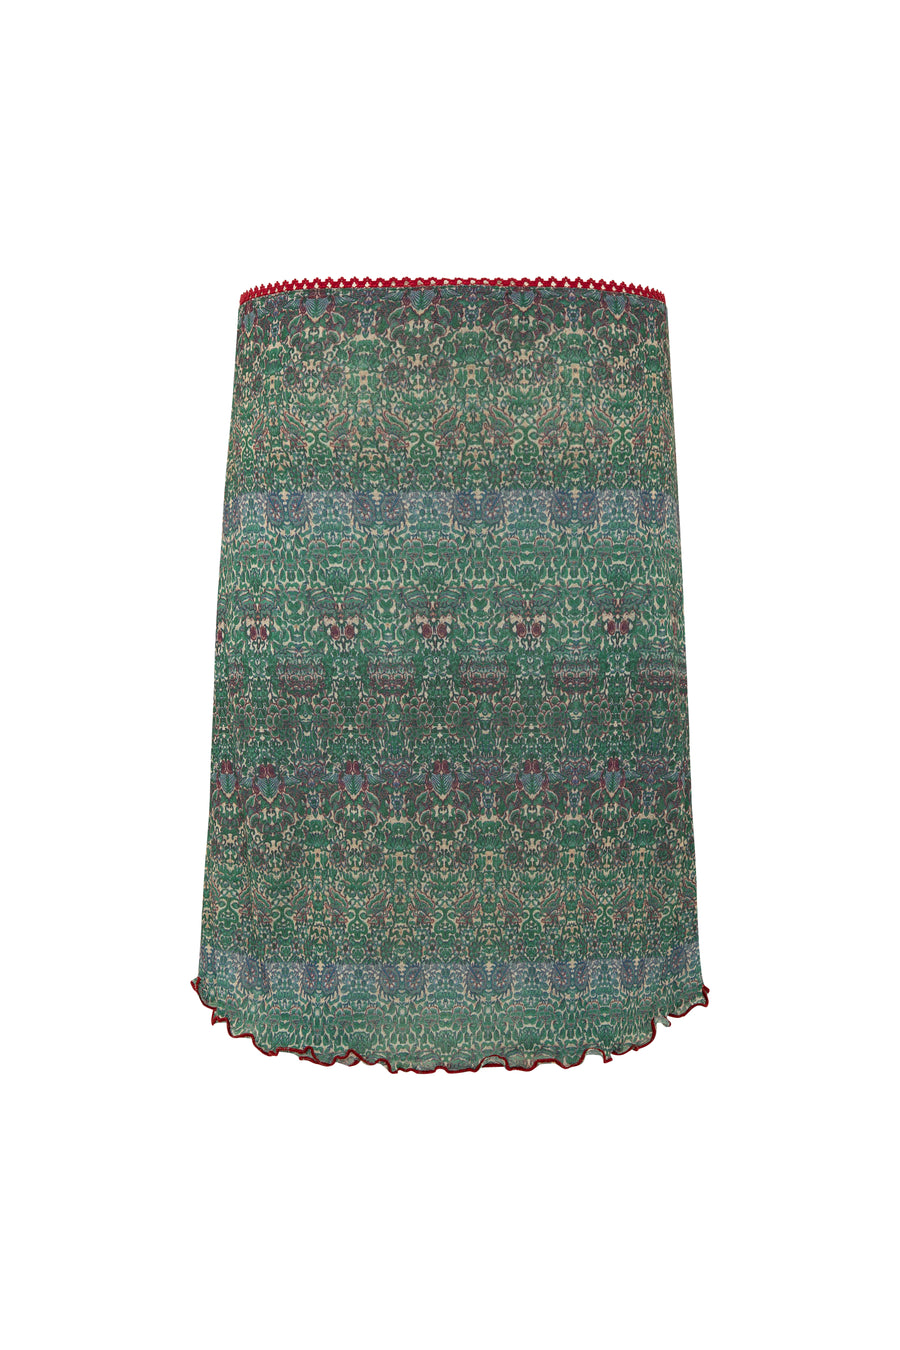 RICA - Scallop detailed textured printed skirt